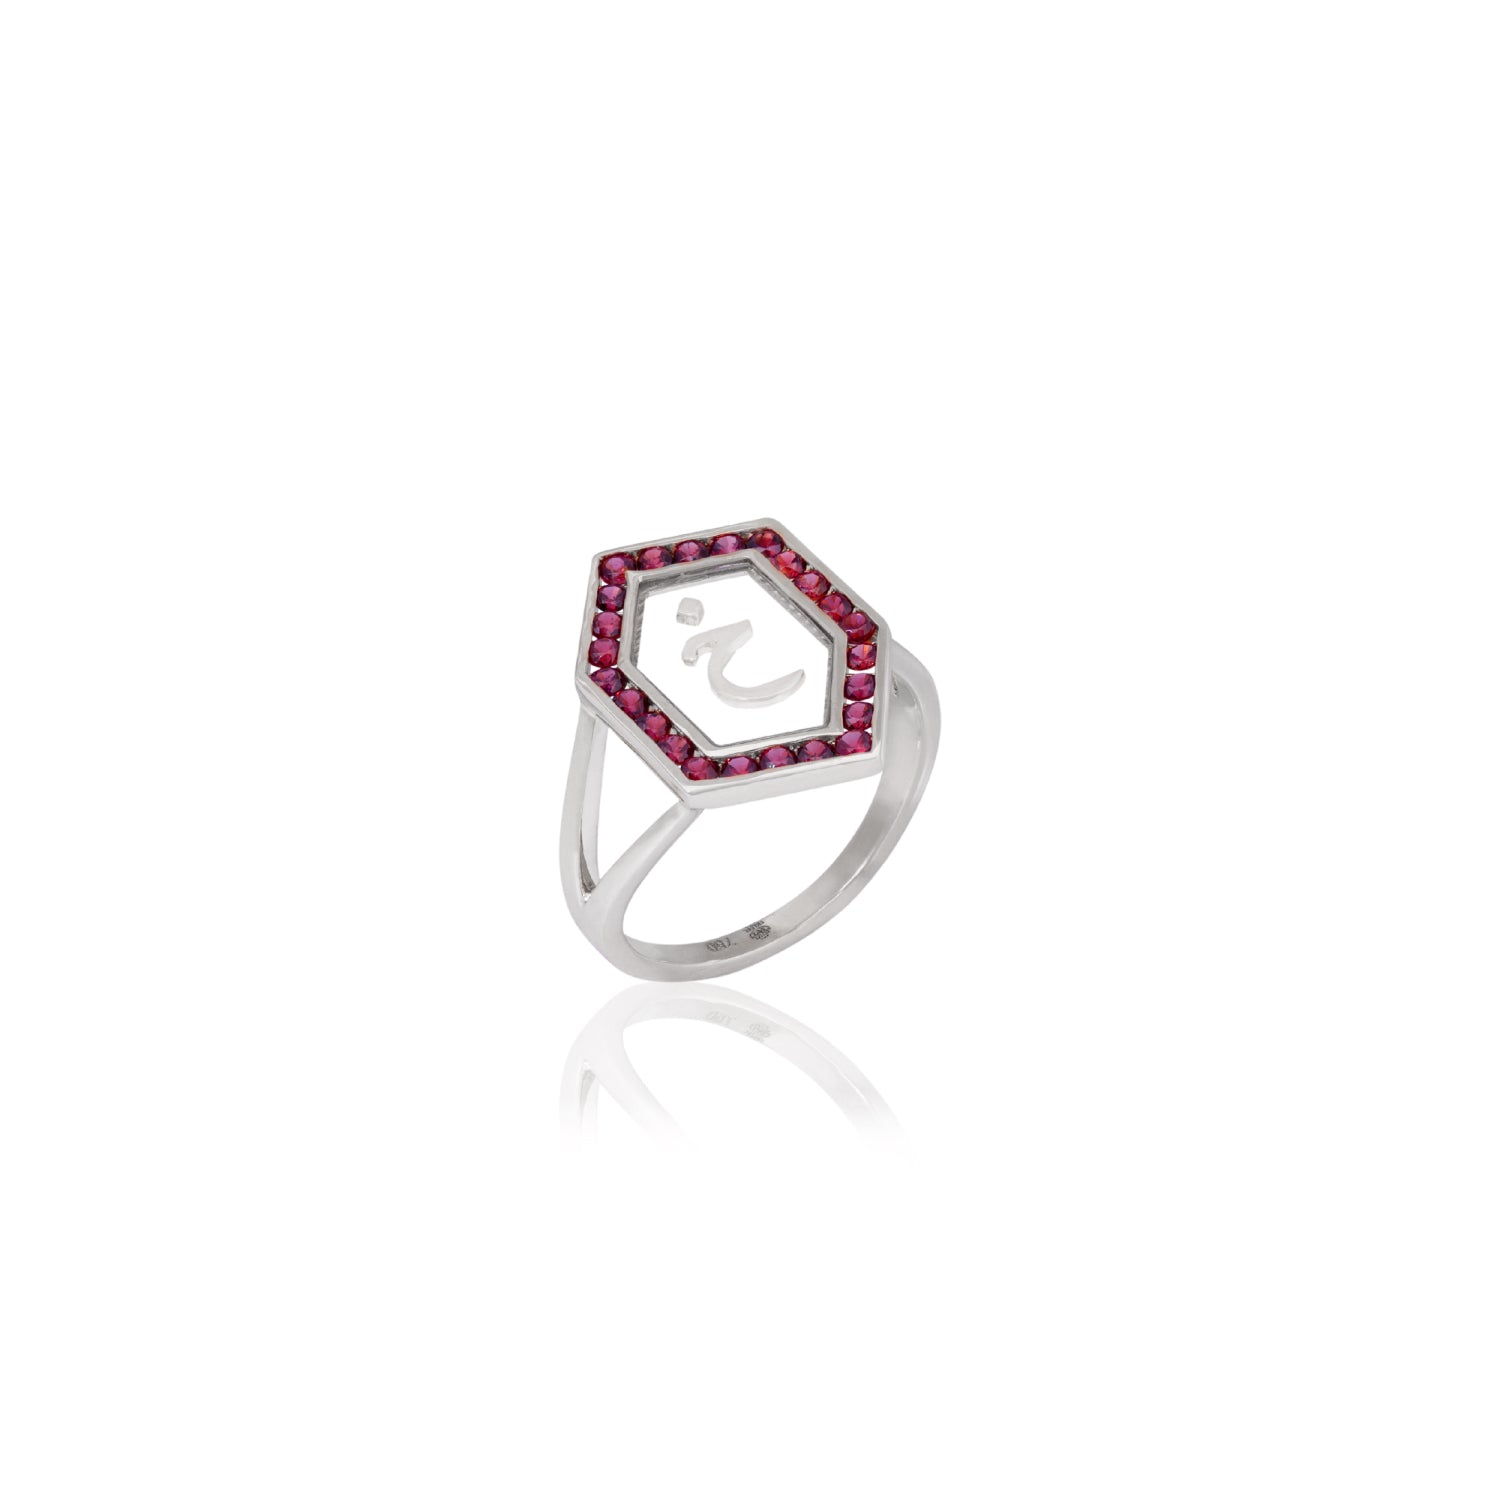 Qamoos 1.0 Letter خ Ruby Ring in White Gold